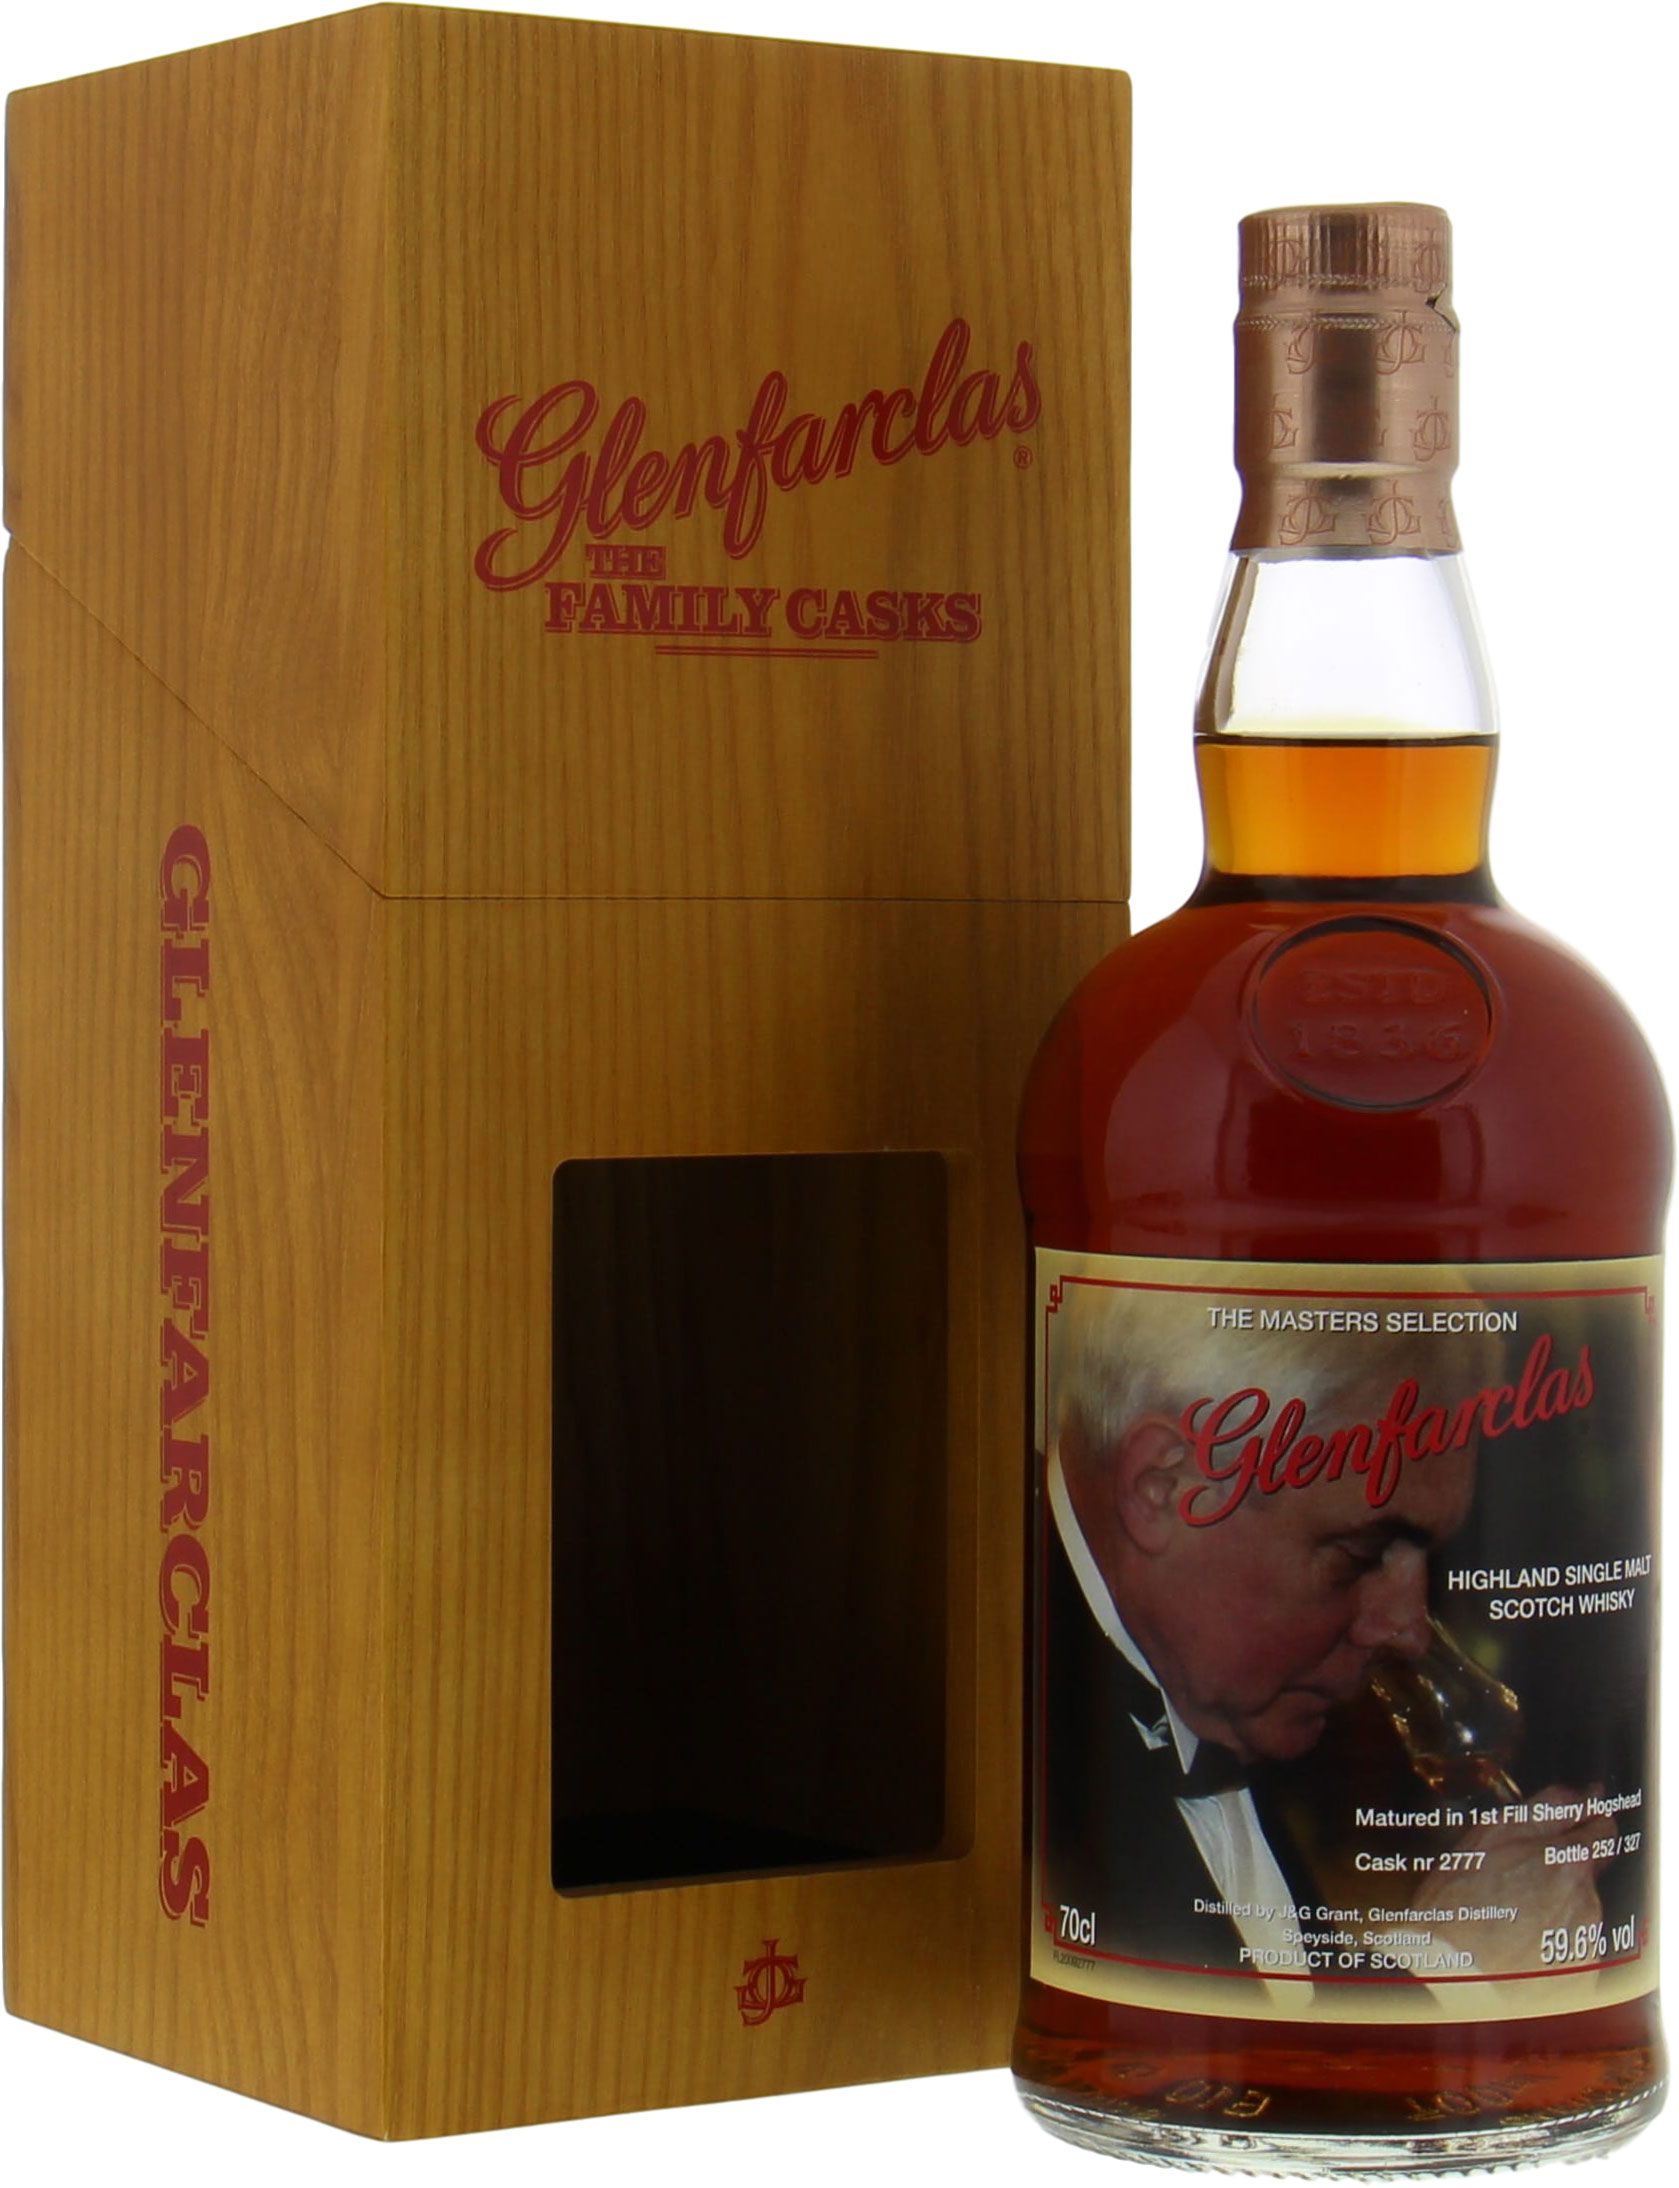 Glenfarclas - The Masters Selection 9 Years Old Cask 2777 59.6% 2009